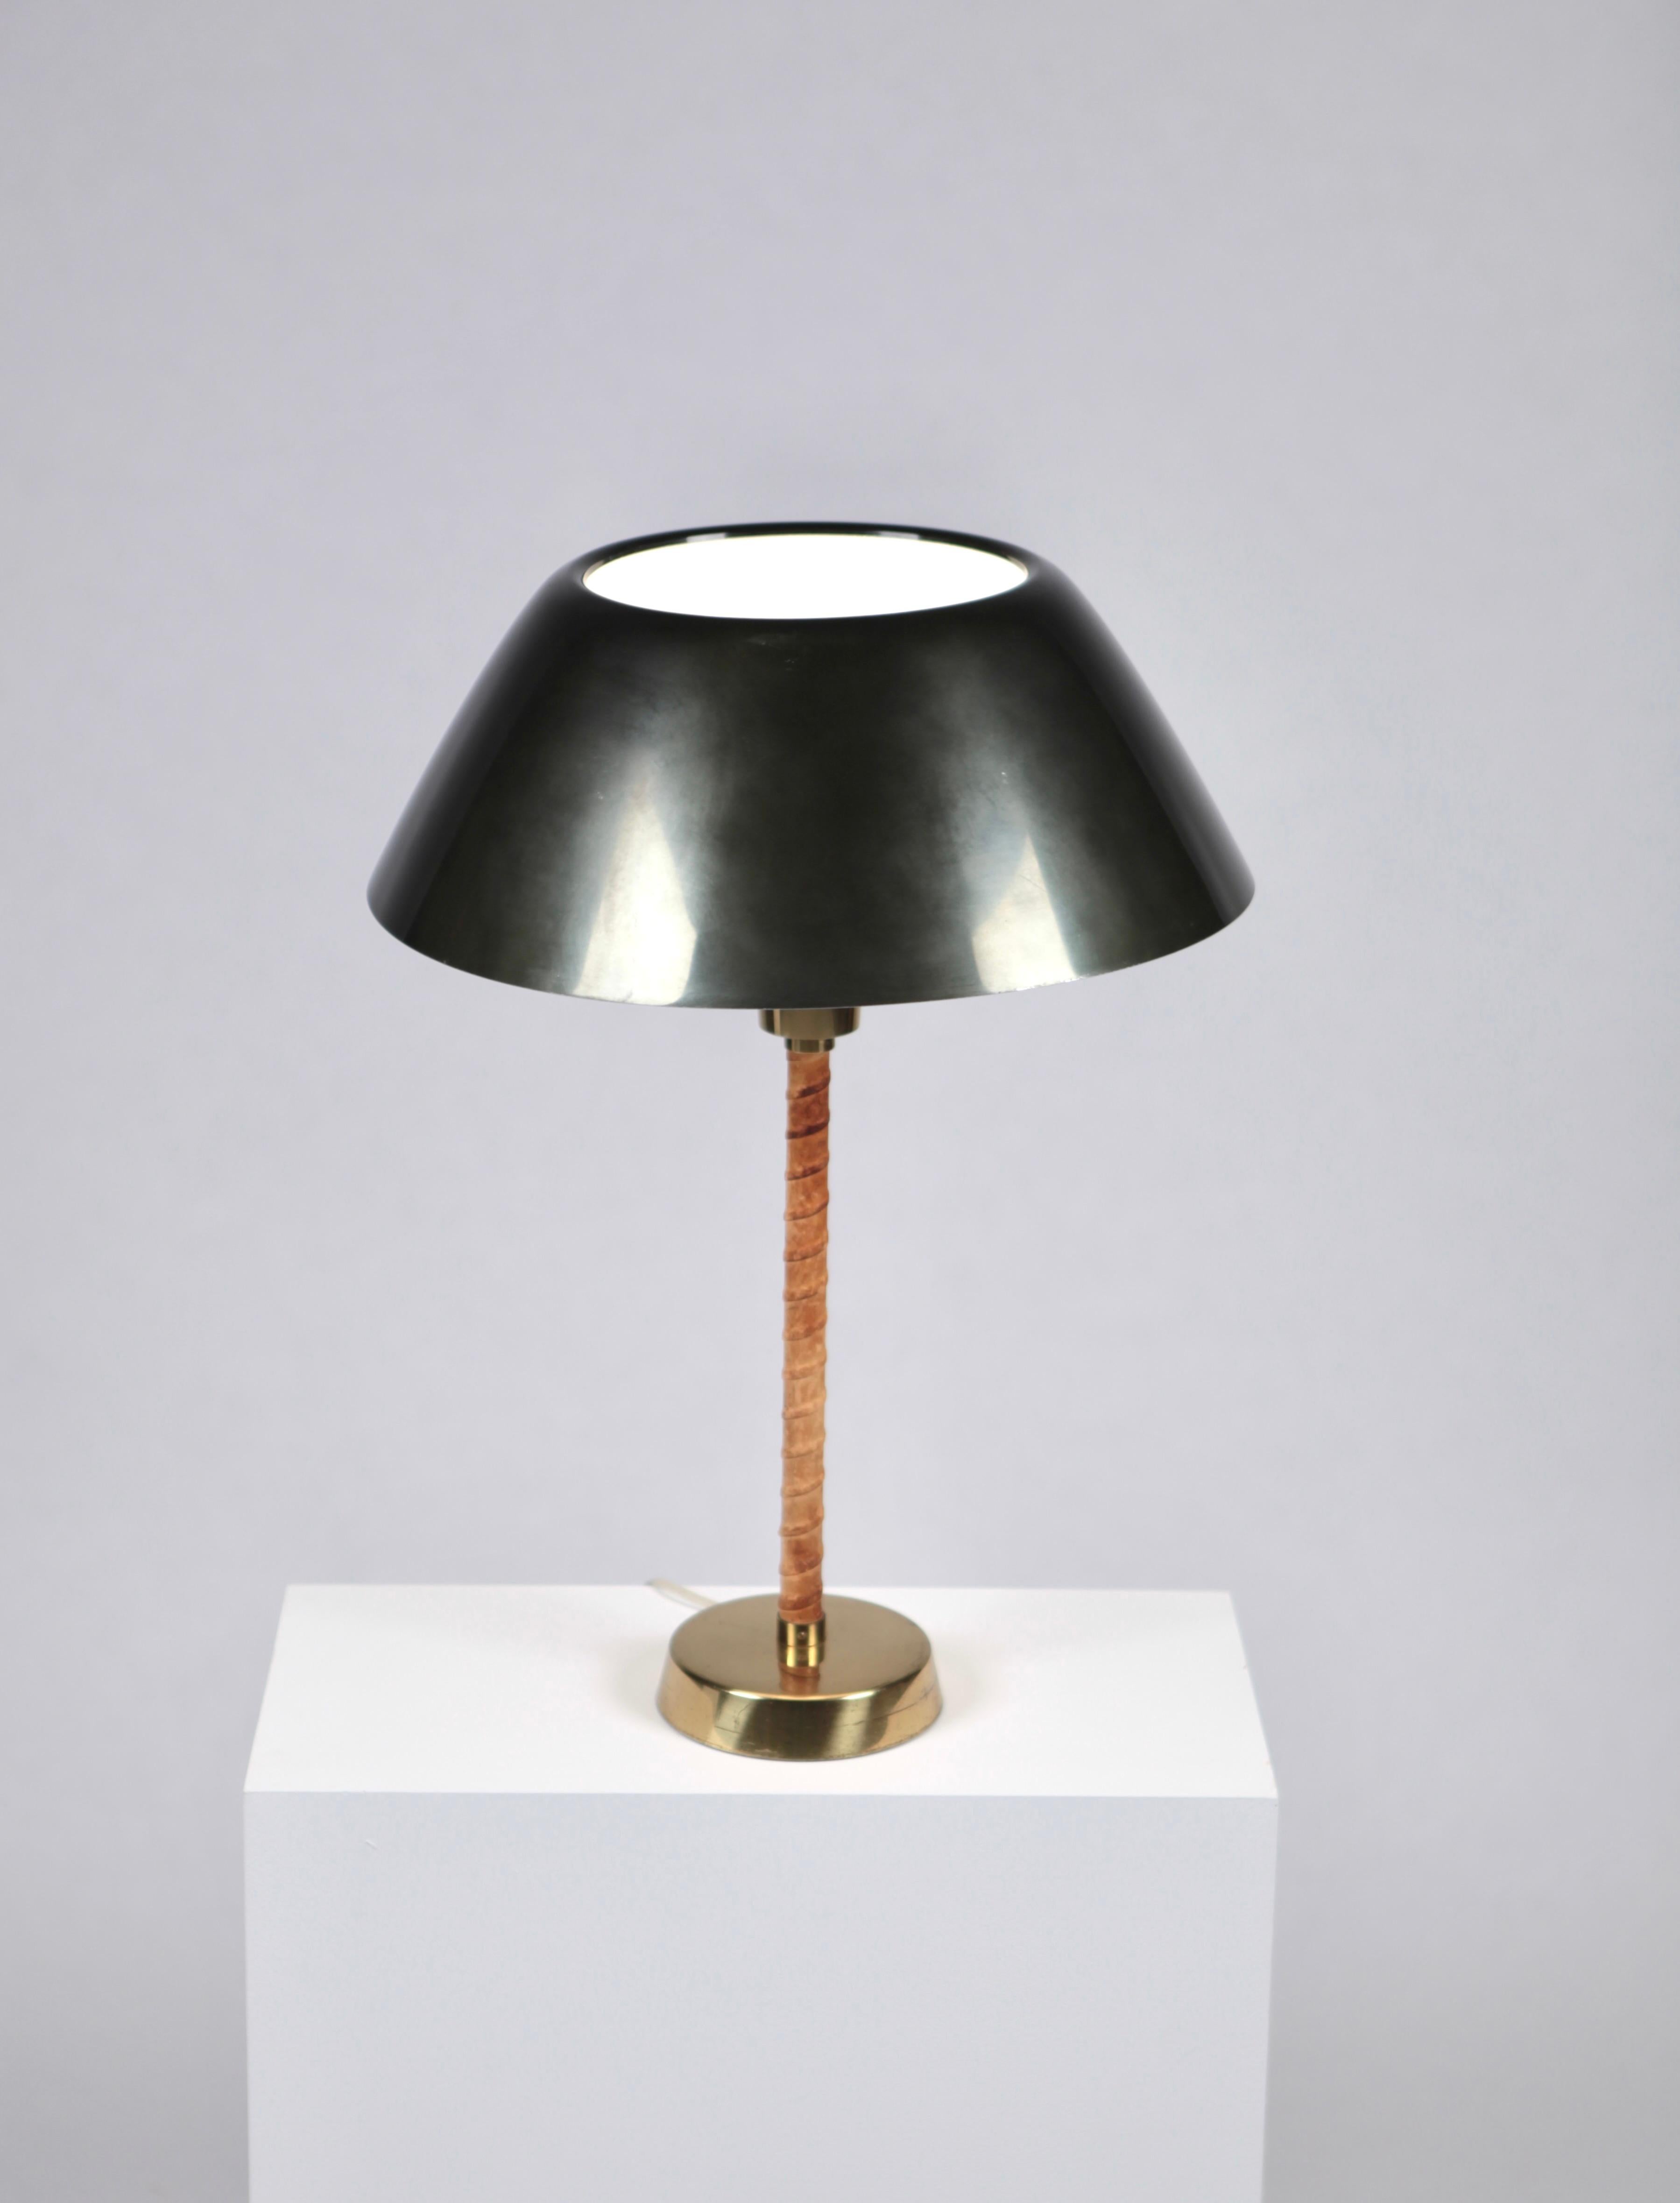 Lisa Johansson-Pape,
Senator table lamp, designed 1947, by Orno in Finland.
Leather, brass and green painted metal shade,
Manufacture mark.